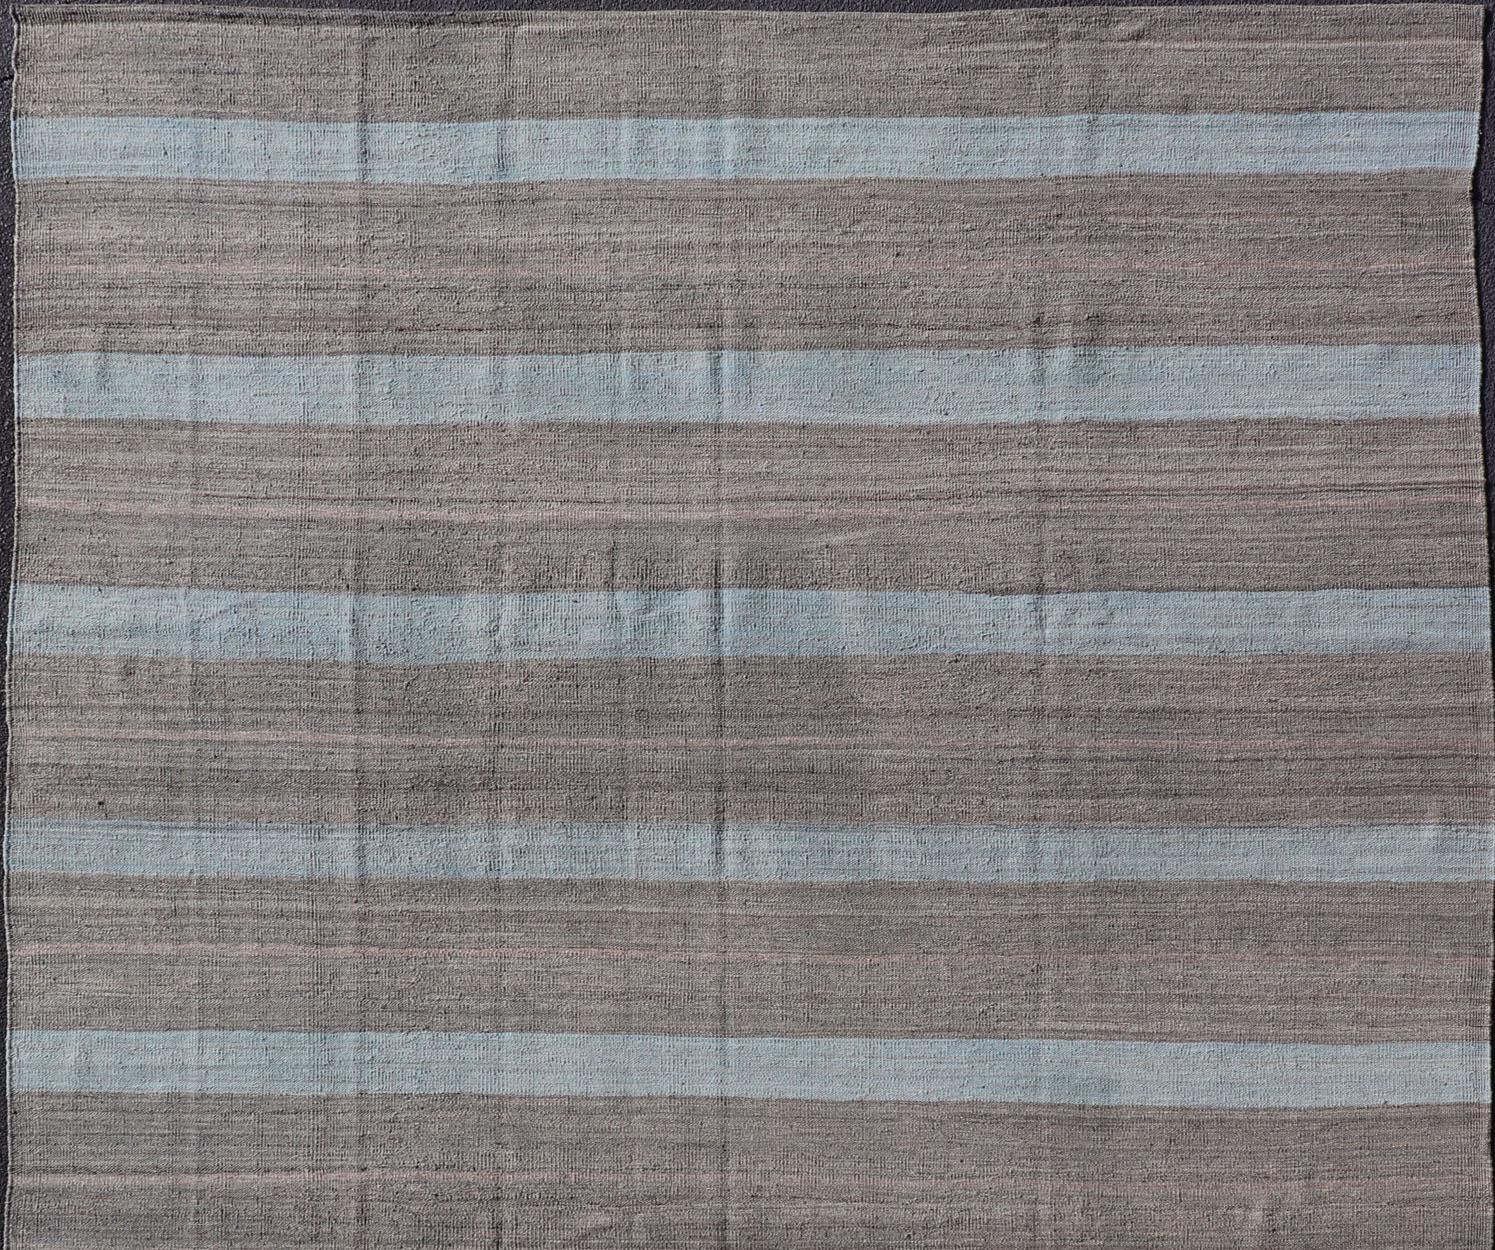 Afghan Modern Kilim Casual Rug with Stripes in Shades of Blue, Gray' and Charcoal